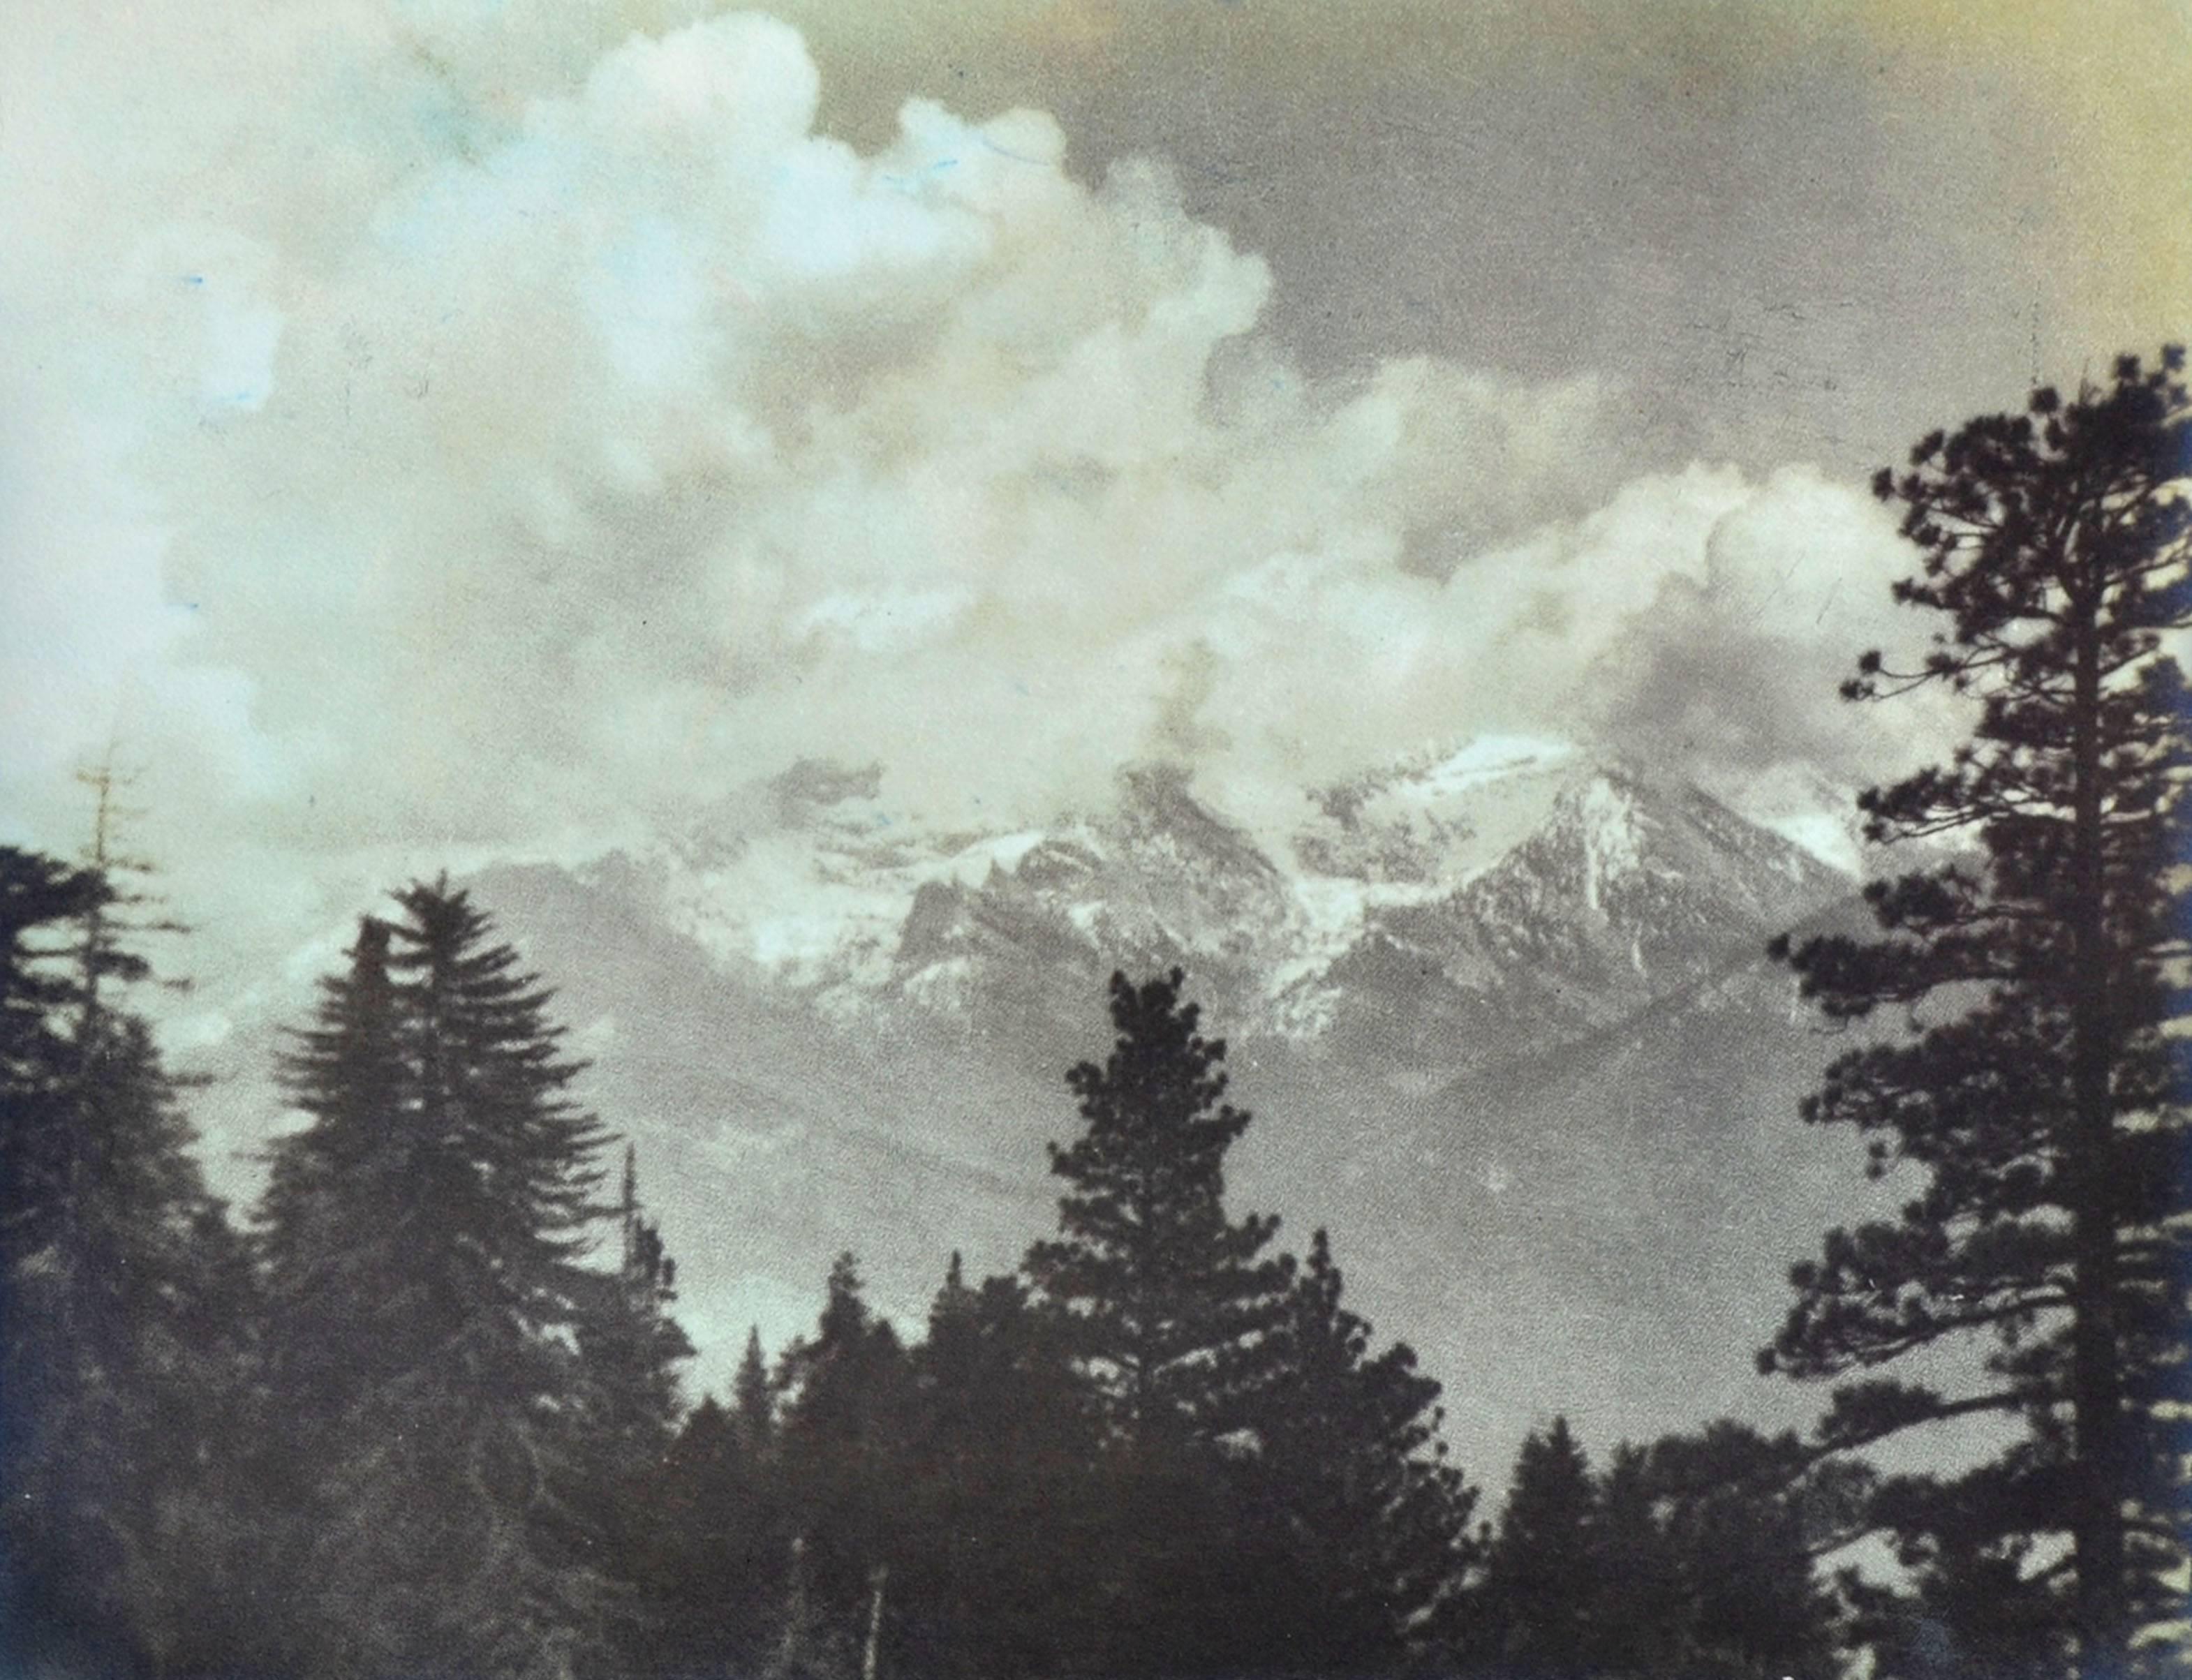 Early 20th Century Photograph -- "Impressions of the High Sierras"